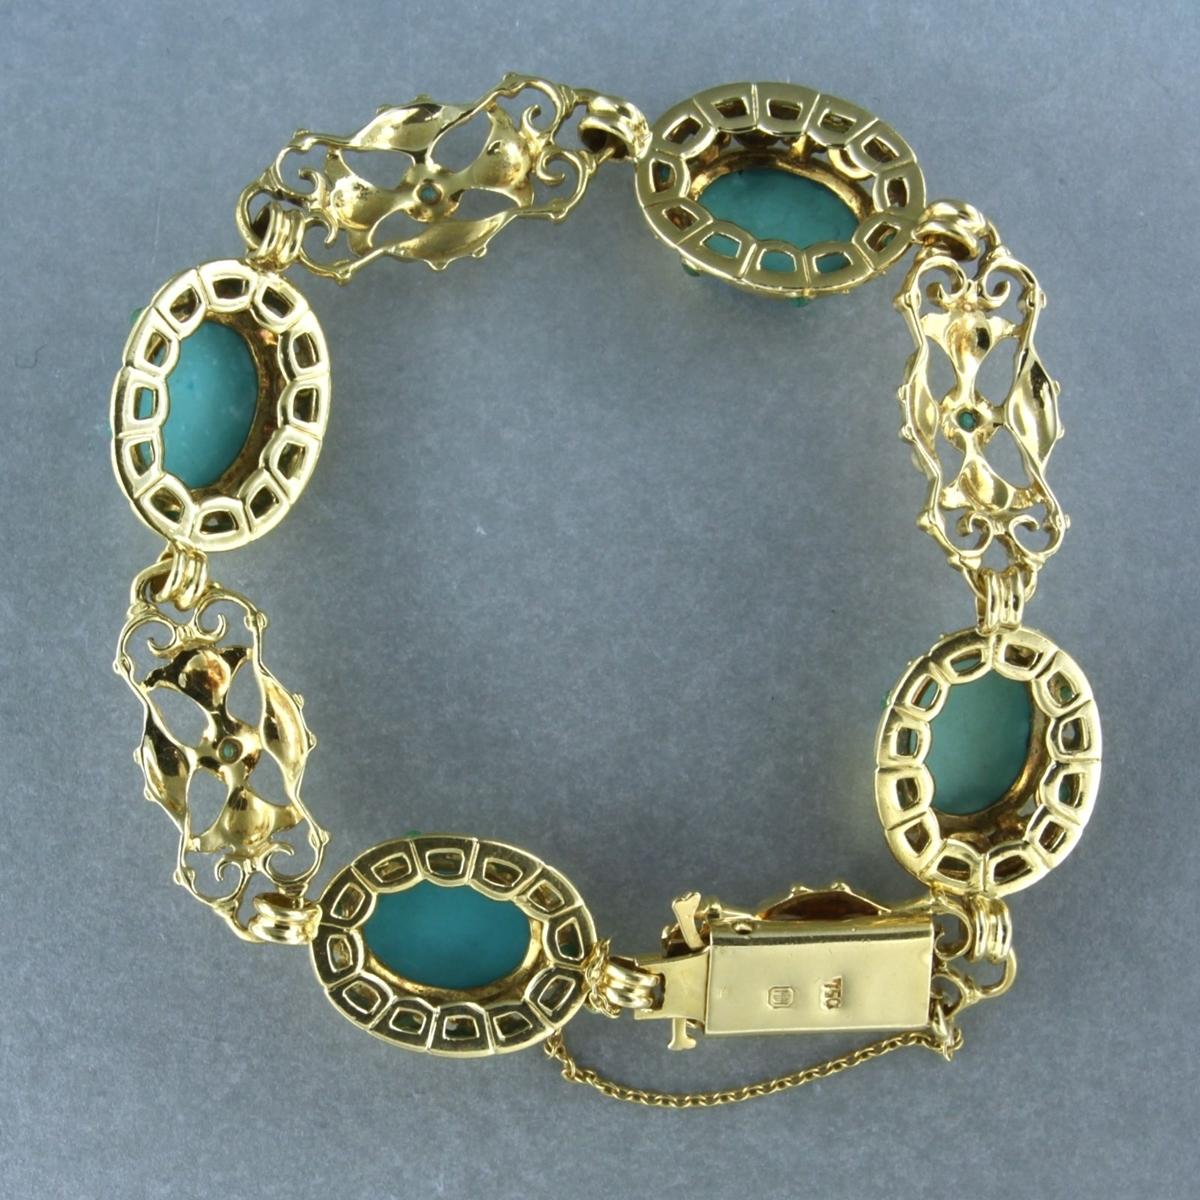 18k yellow gold bracelet set with turquoise - 18 cm long For Sale 1